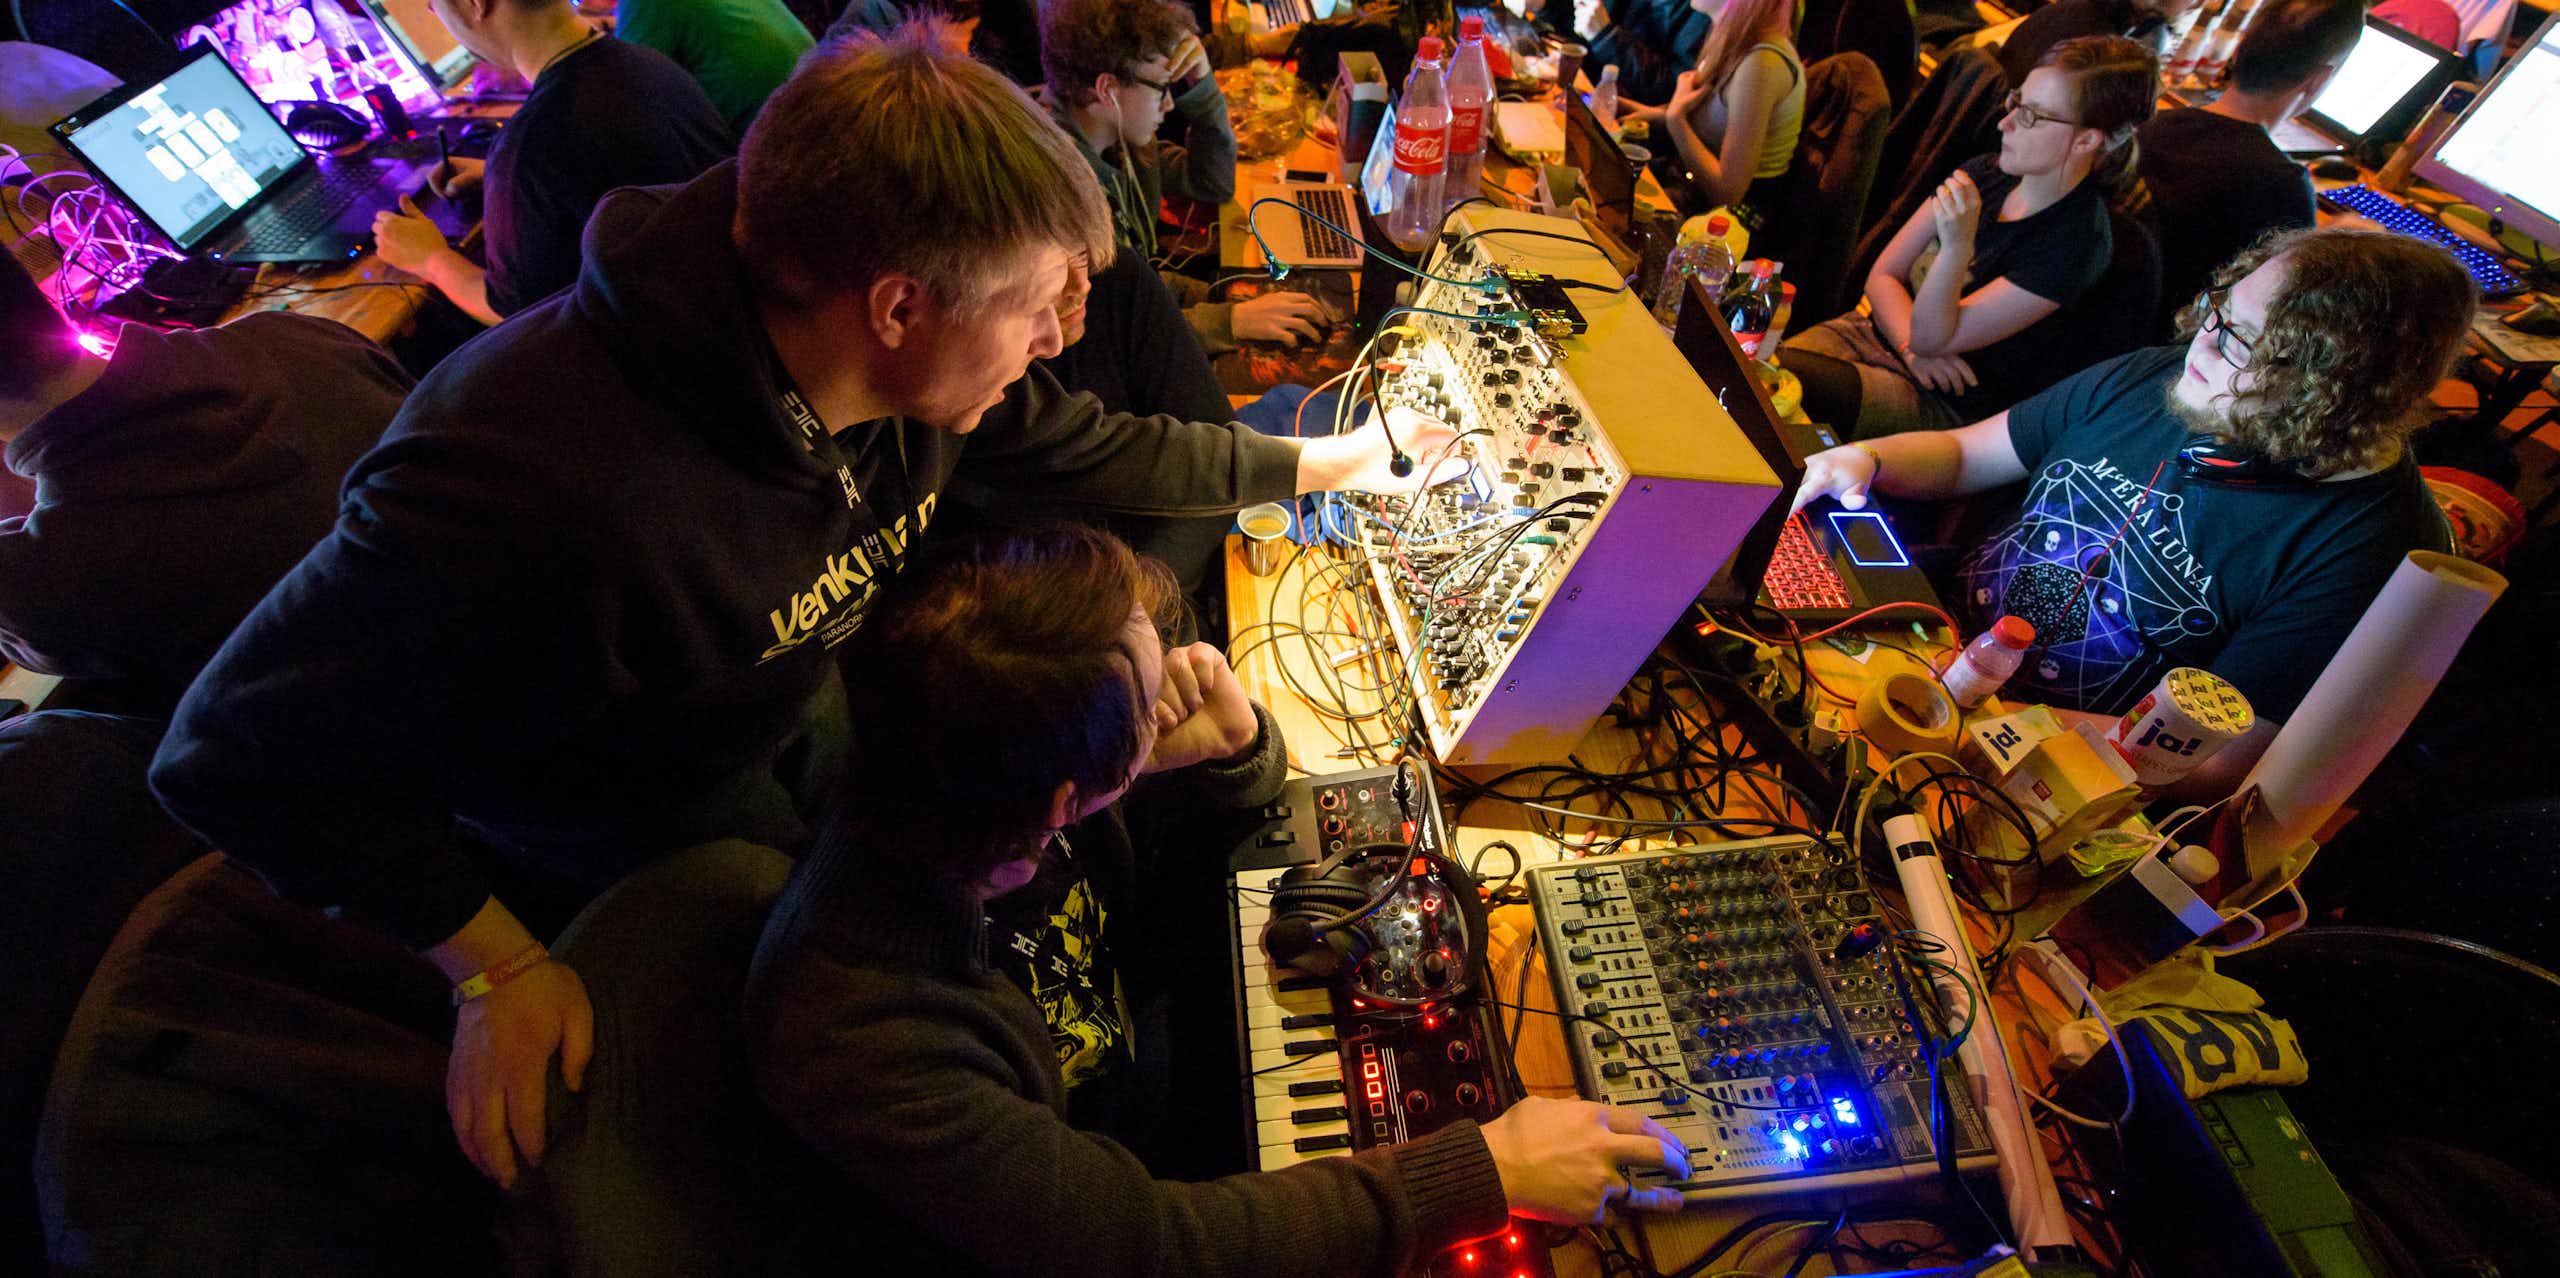 Technology enthusiasts work on modular synthesizers at an analogue tech festival